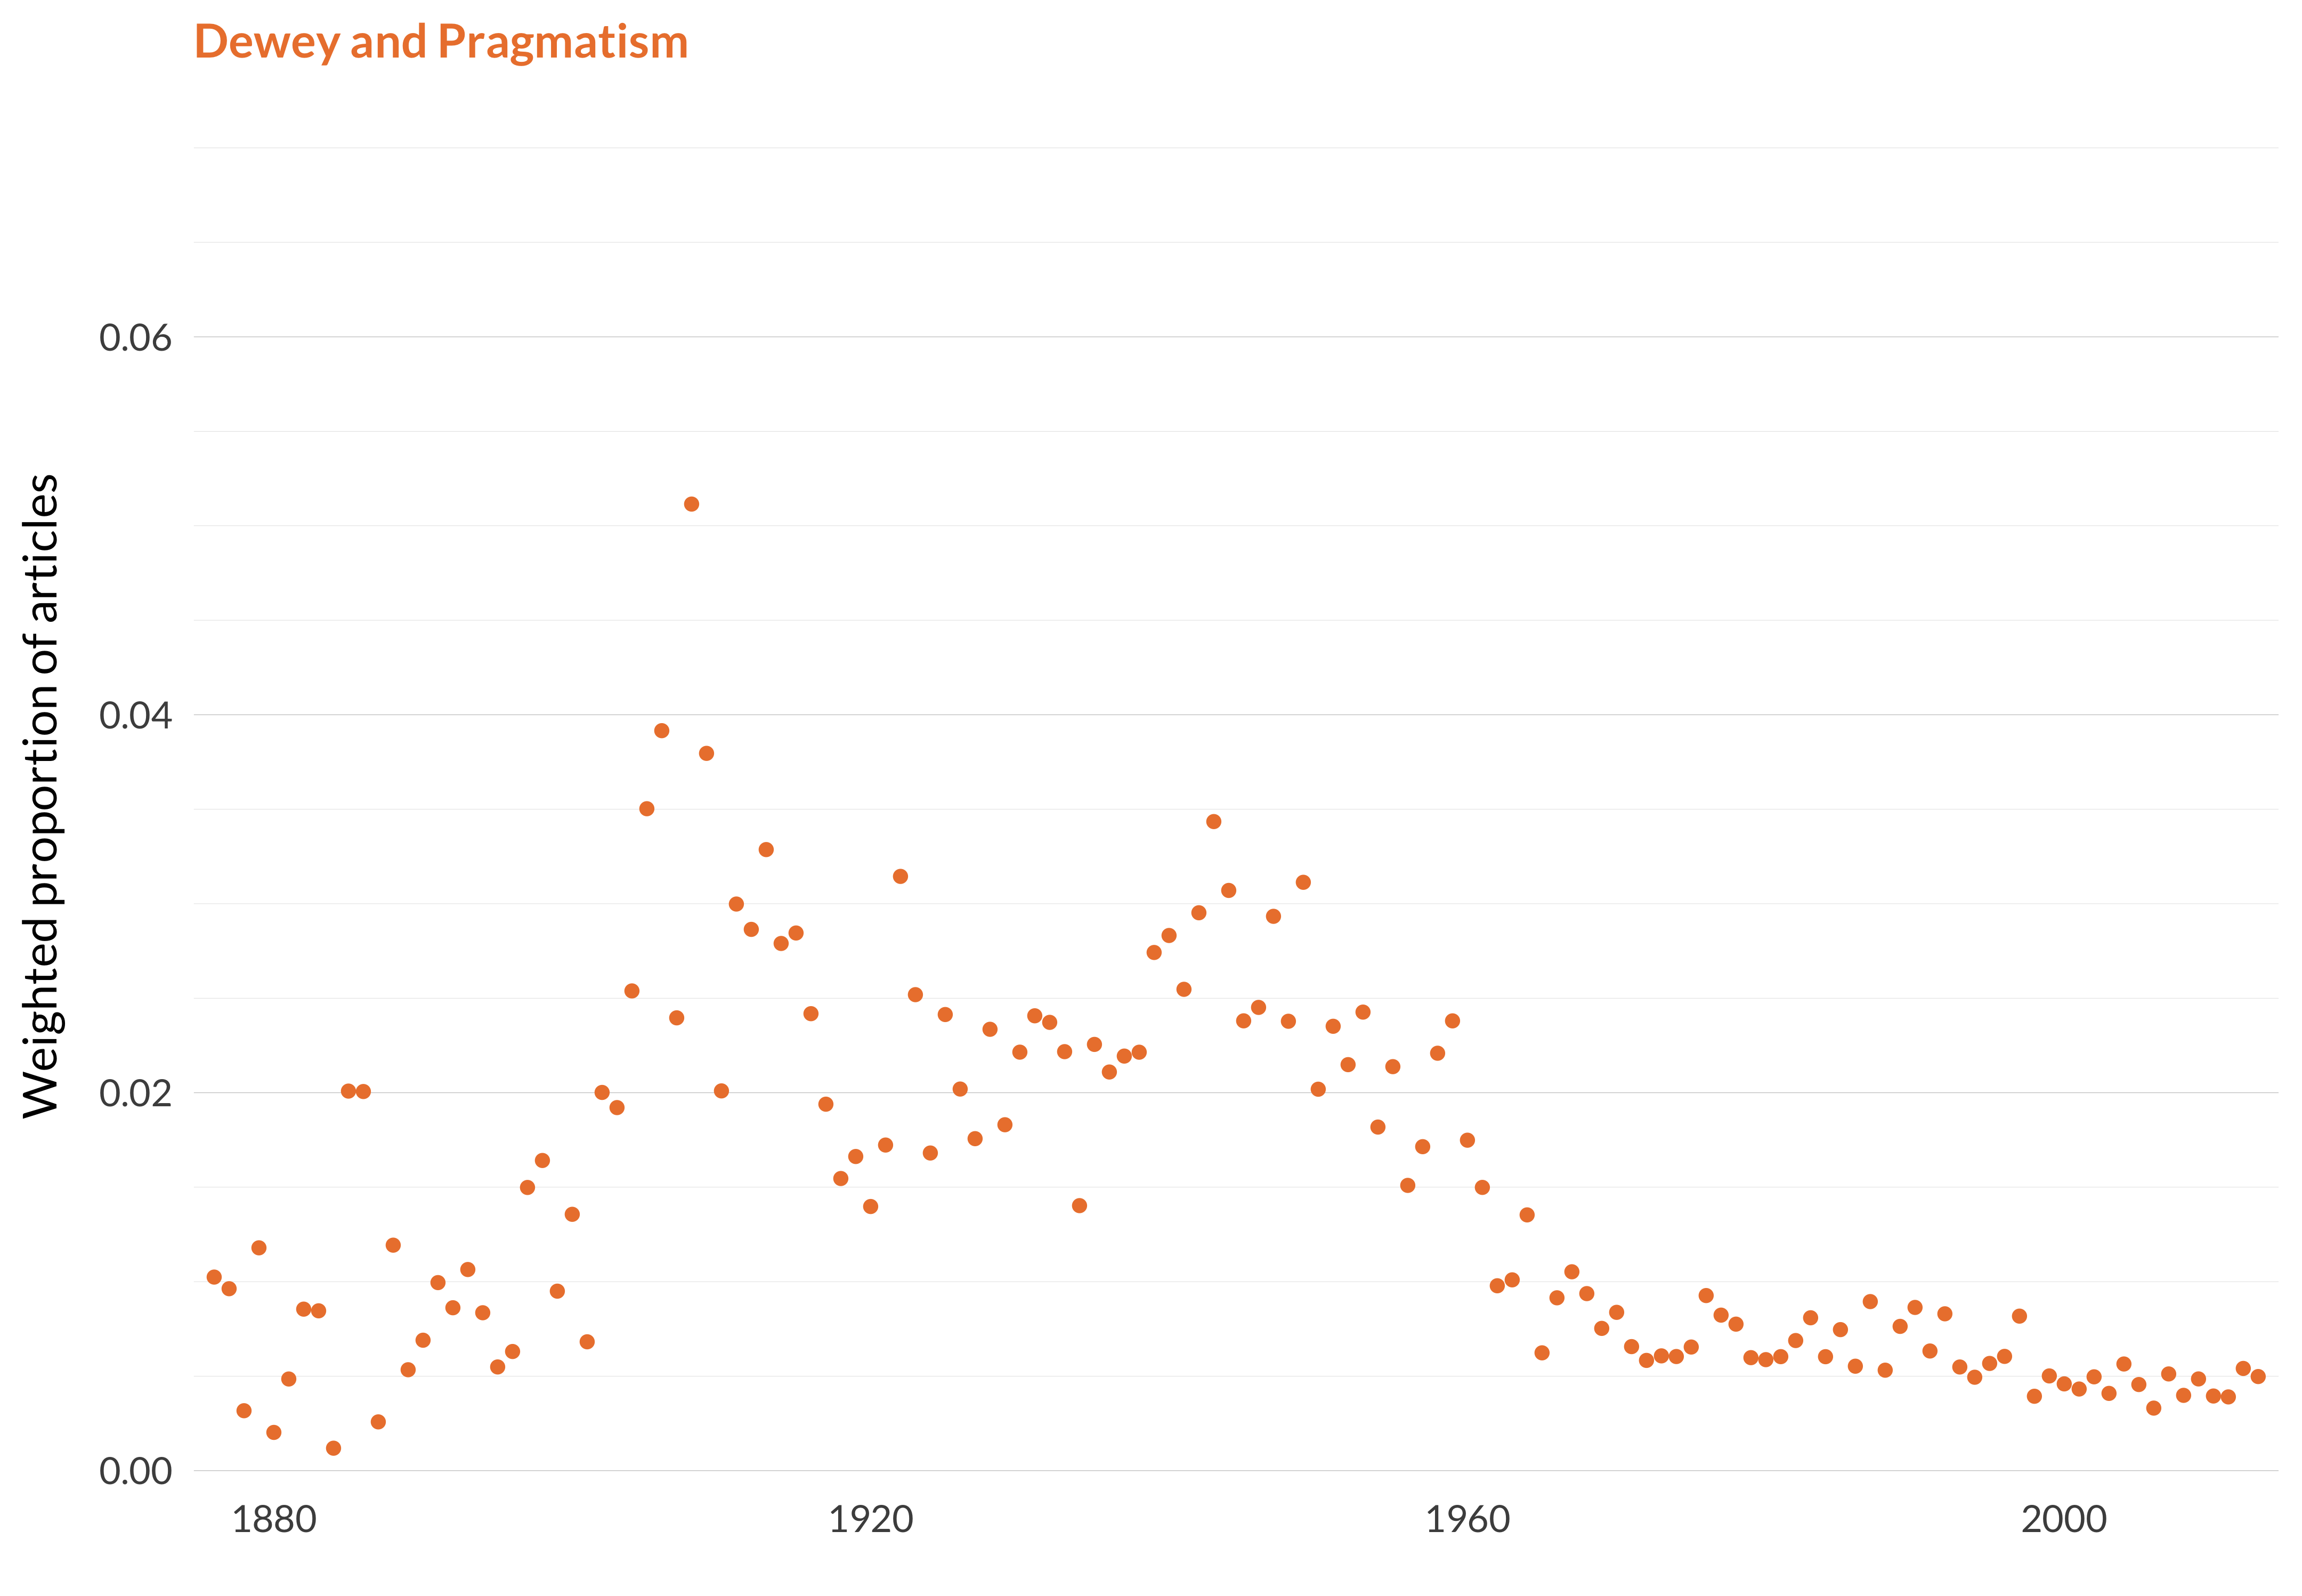 A scatterplot showing which proportion of articles each year are in the Dewey and pragmatismtopic. The x-axis shows the year, the y-axis measures the proportion of articles each year in this topic. There is one dot per year. The highest value is in 1908 when 5.1% of articles were in this topic. The lowest value is in 1884 when 0.1% of articles were in this topic. The full table that provides the data for this graph is available in Table A.5 in Appendix A.